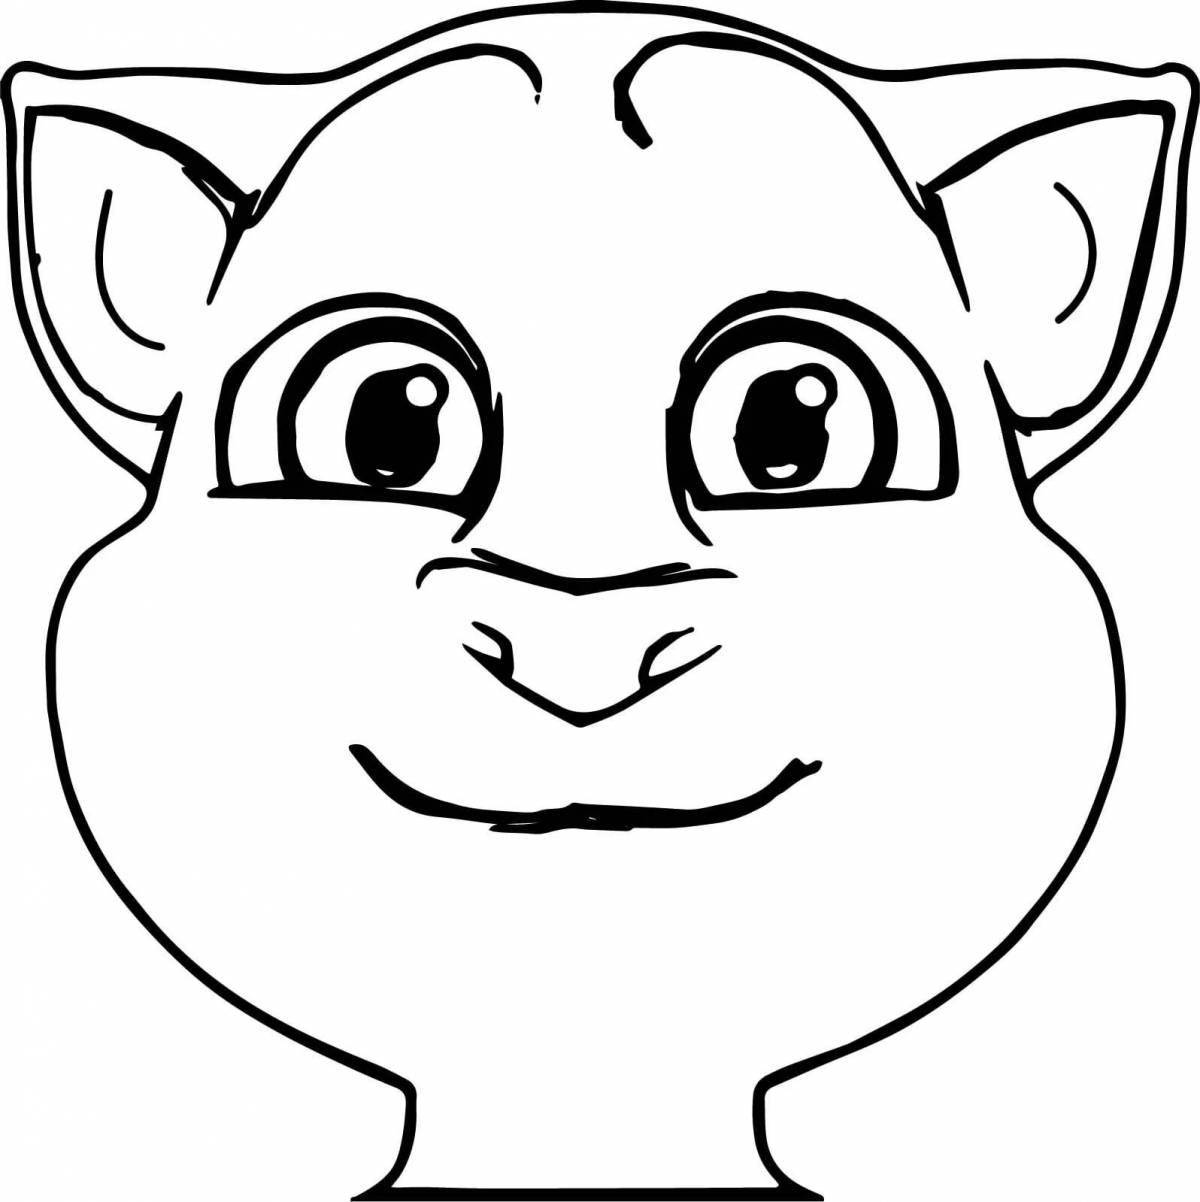 Live talking angela coloring book